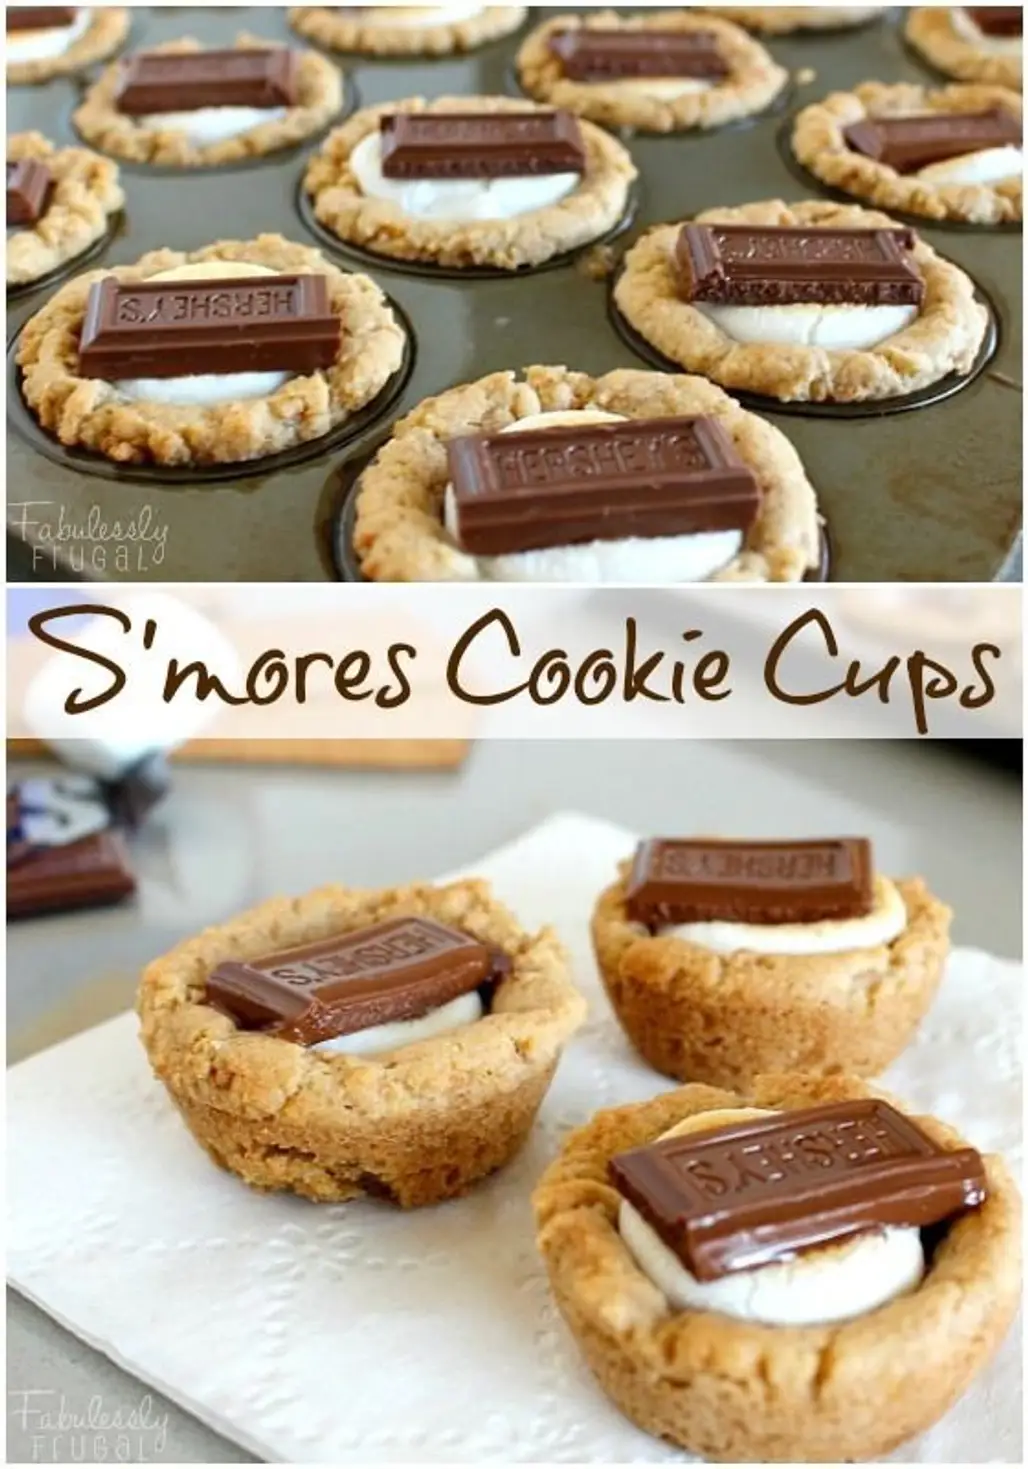 S'mores Cookie Cups!